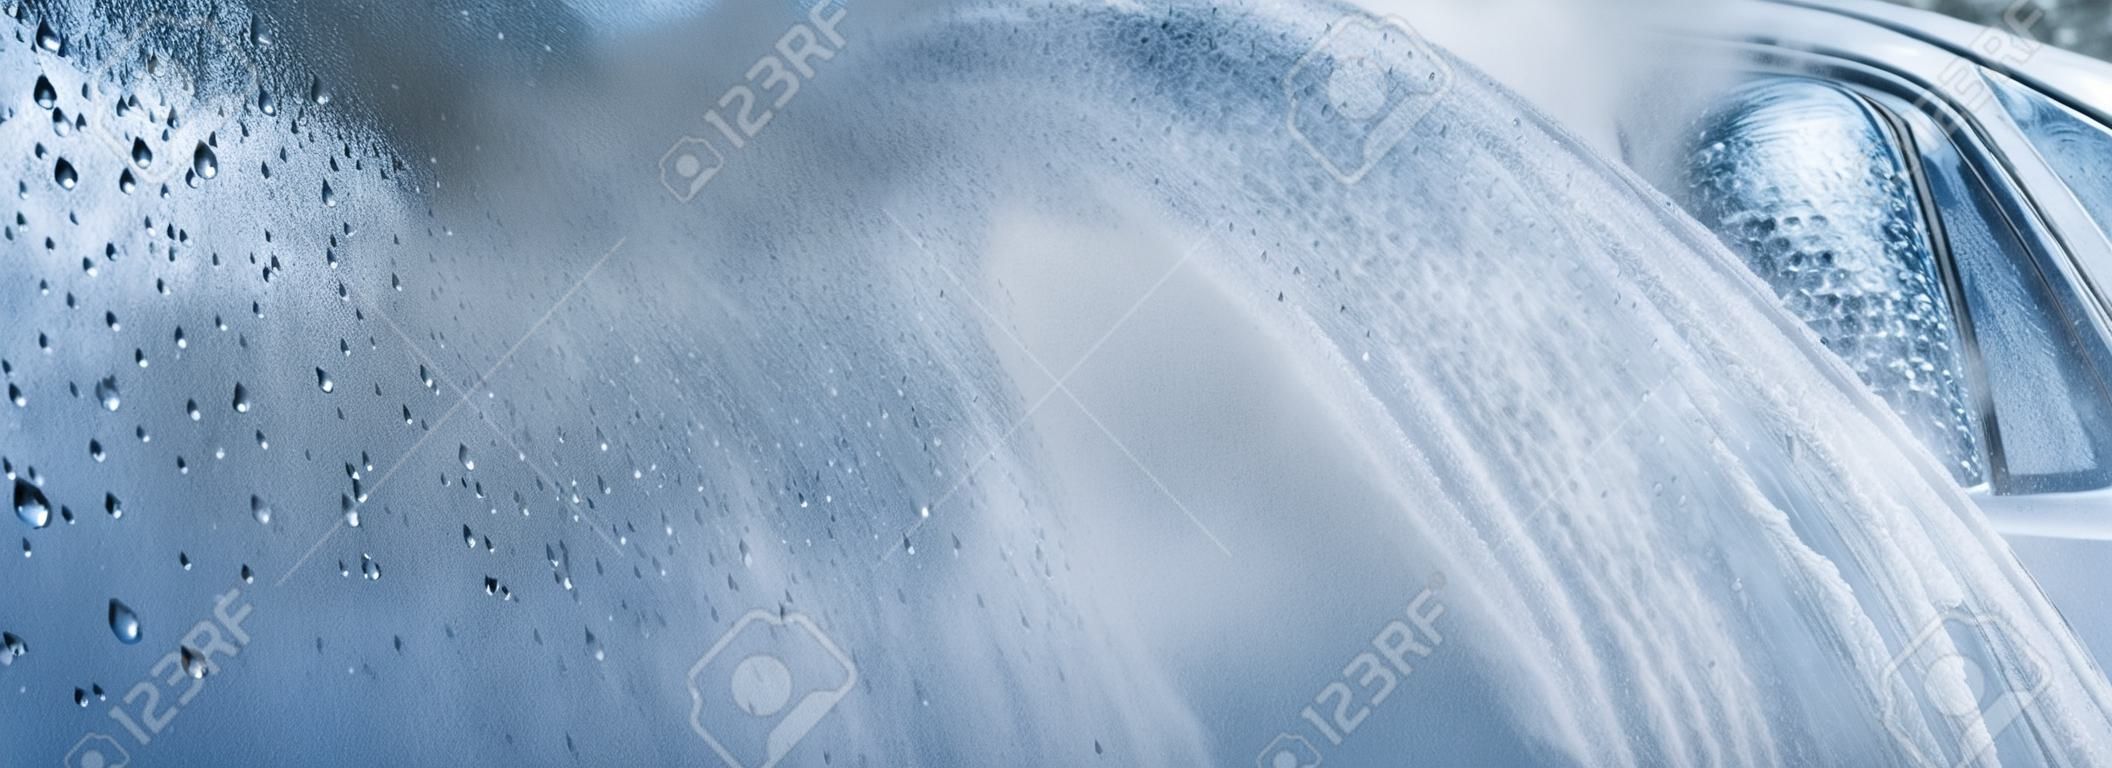 Abstract carwash banner, focus only on drops of water, jet spraying to car out of focus, toned in light blue color.